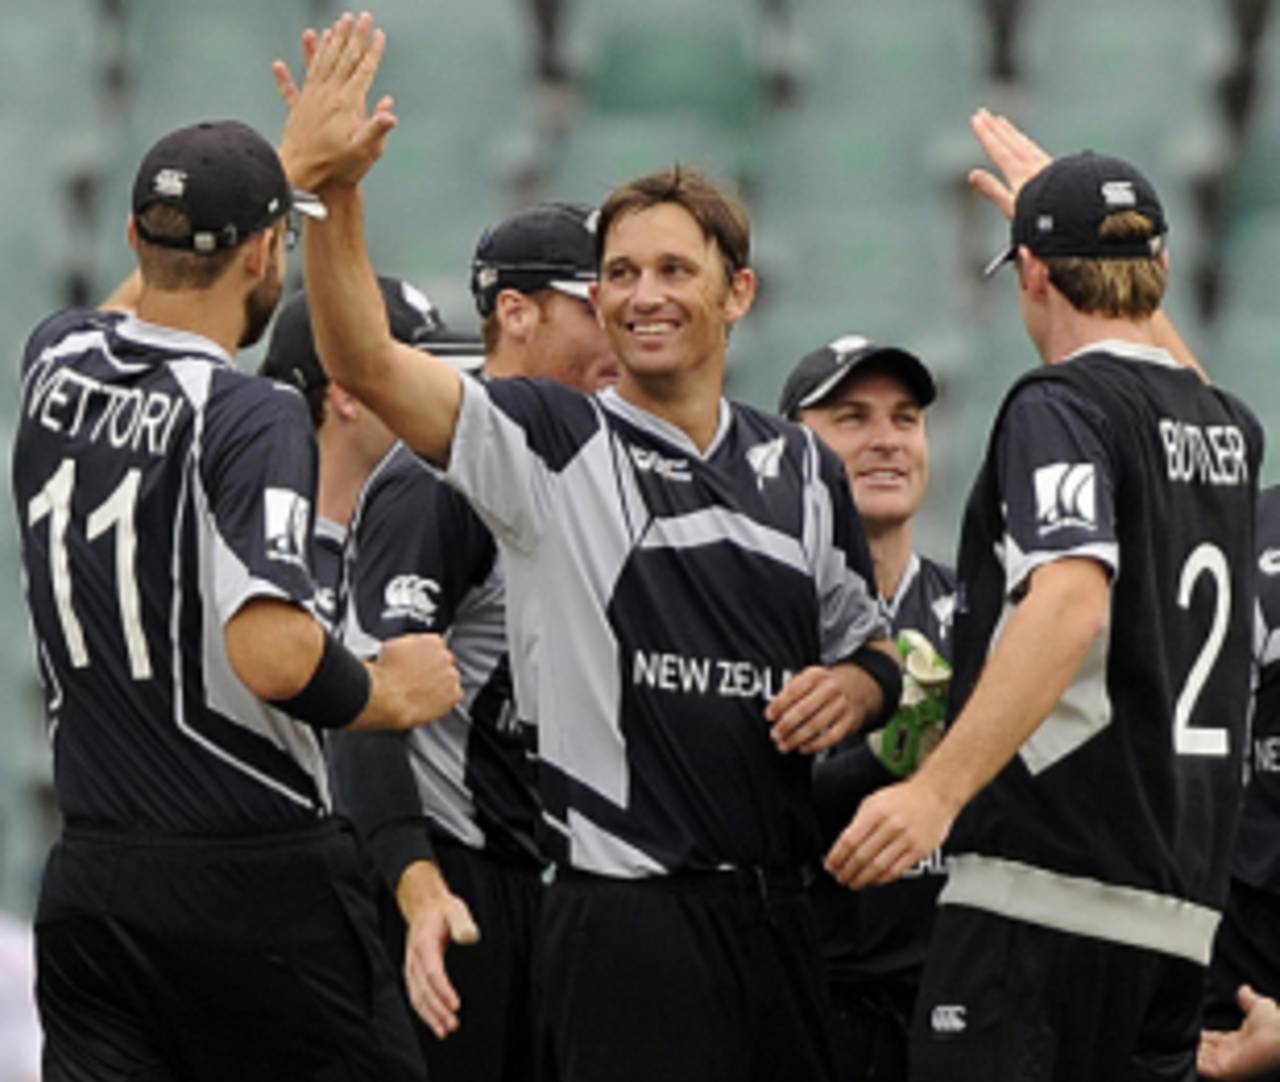 Shane Bond gets the high fives after accounting for Owais Shah, England v New Zealand, ICC Champions Trophy, Group B, Johannesburg, September 29, 2009